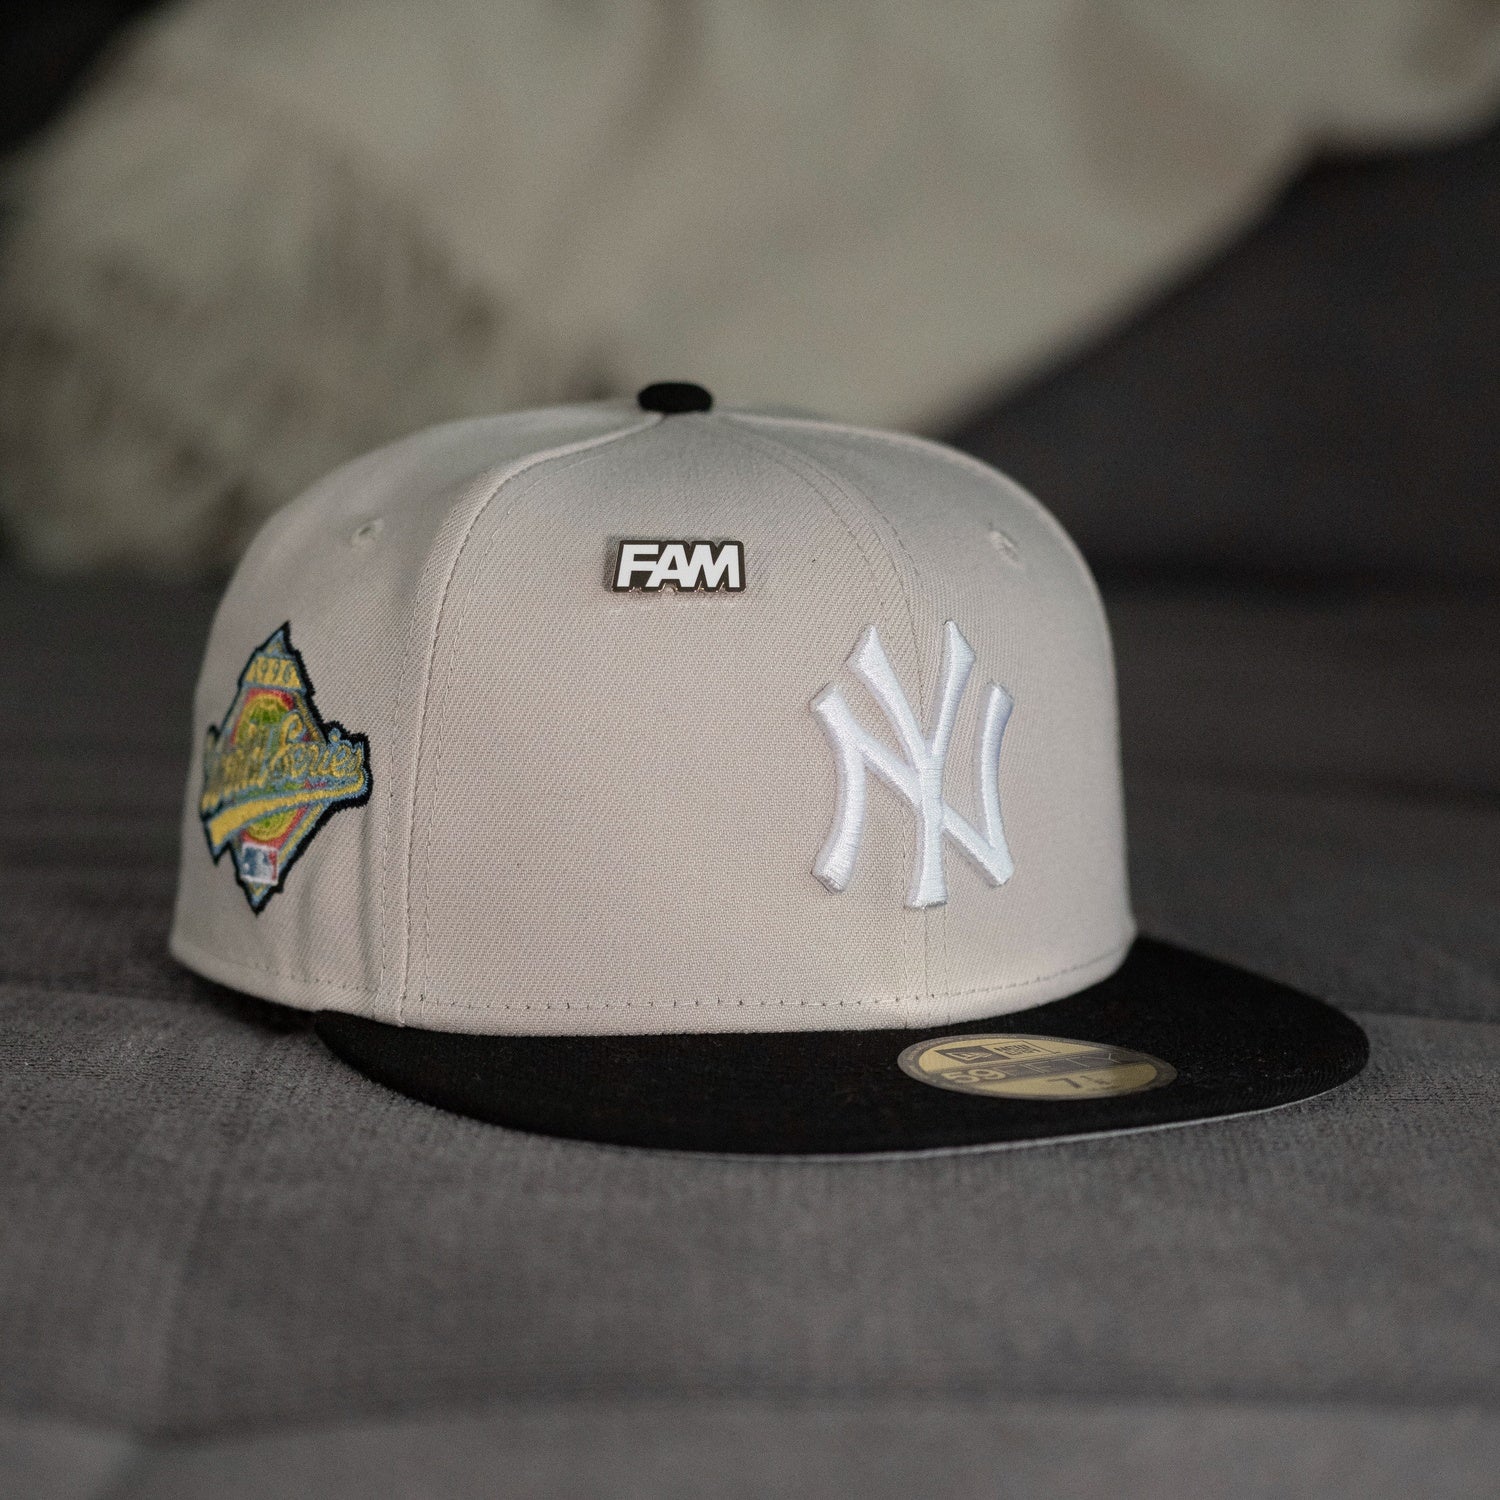 EXCLUSIVE 59FIFTY MLB NEW YORK YANKEES ASG 2000 NAVY / YELLOW UV